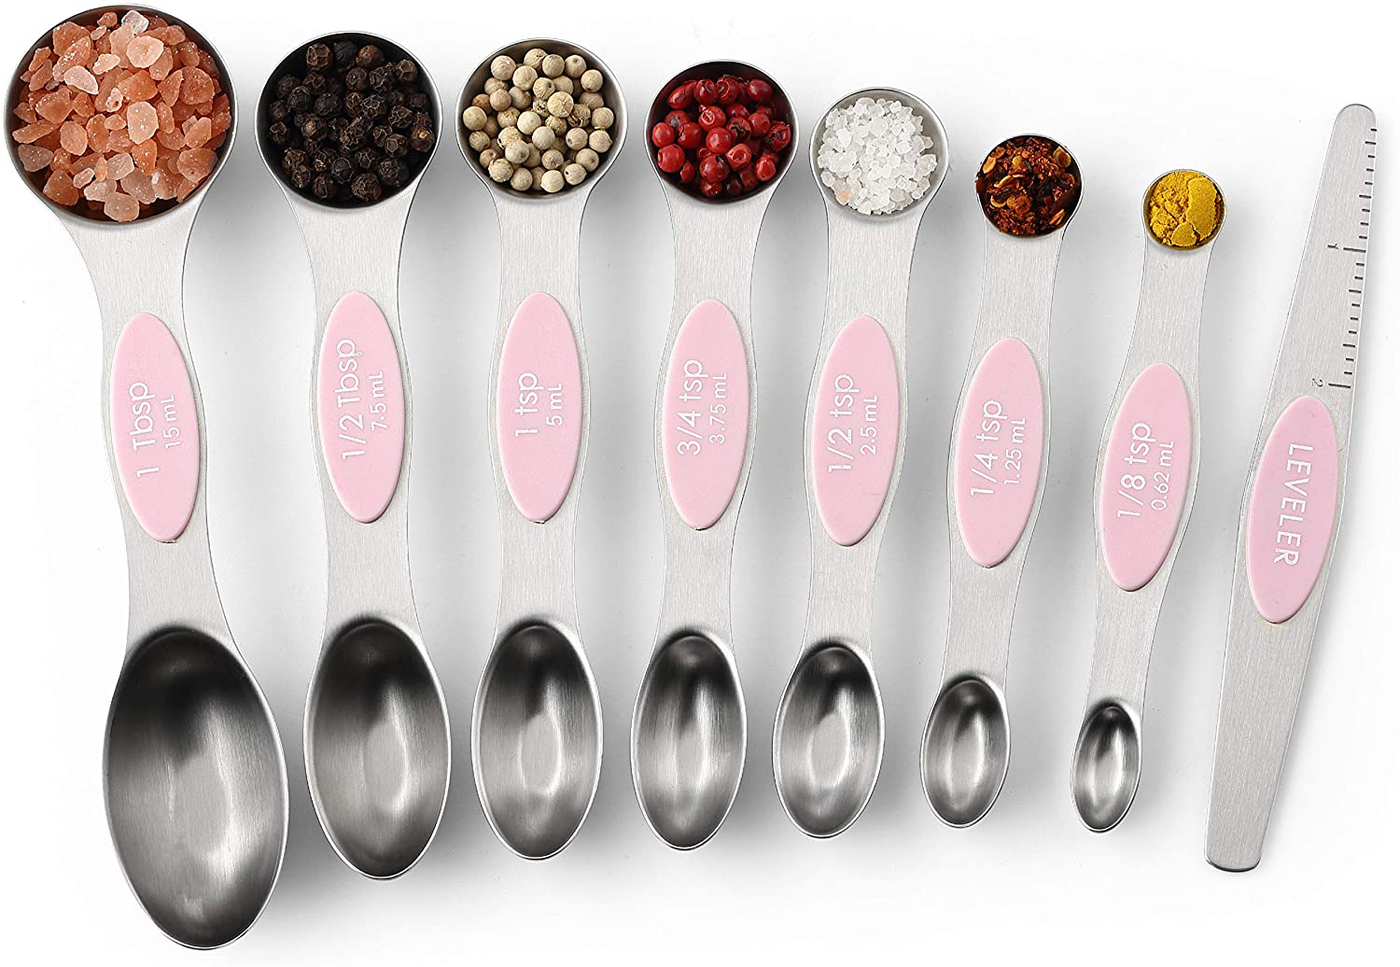 Spring Chef Magnetic Measuring Spoons Set, Dual Sided, Stainless Steel, Fits in Spice Jars, Pink Lemonade, Set of 8